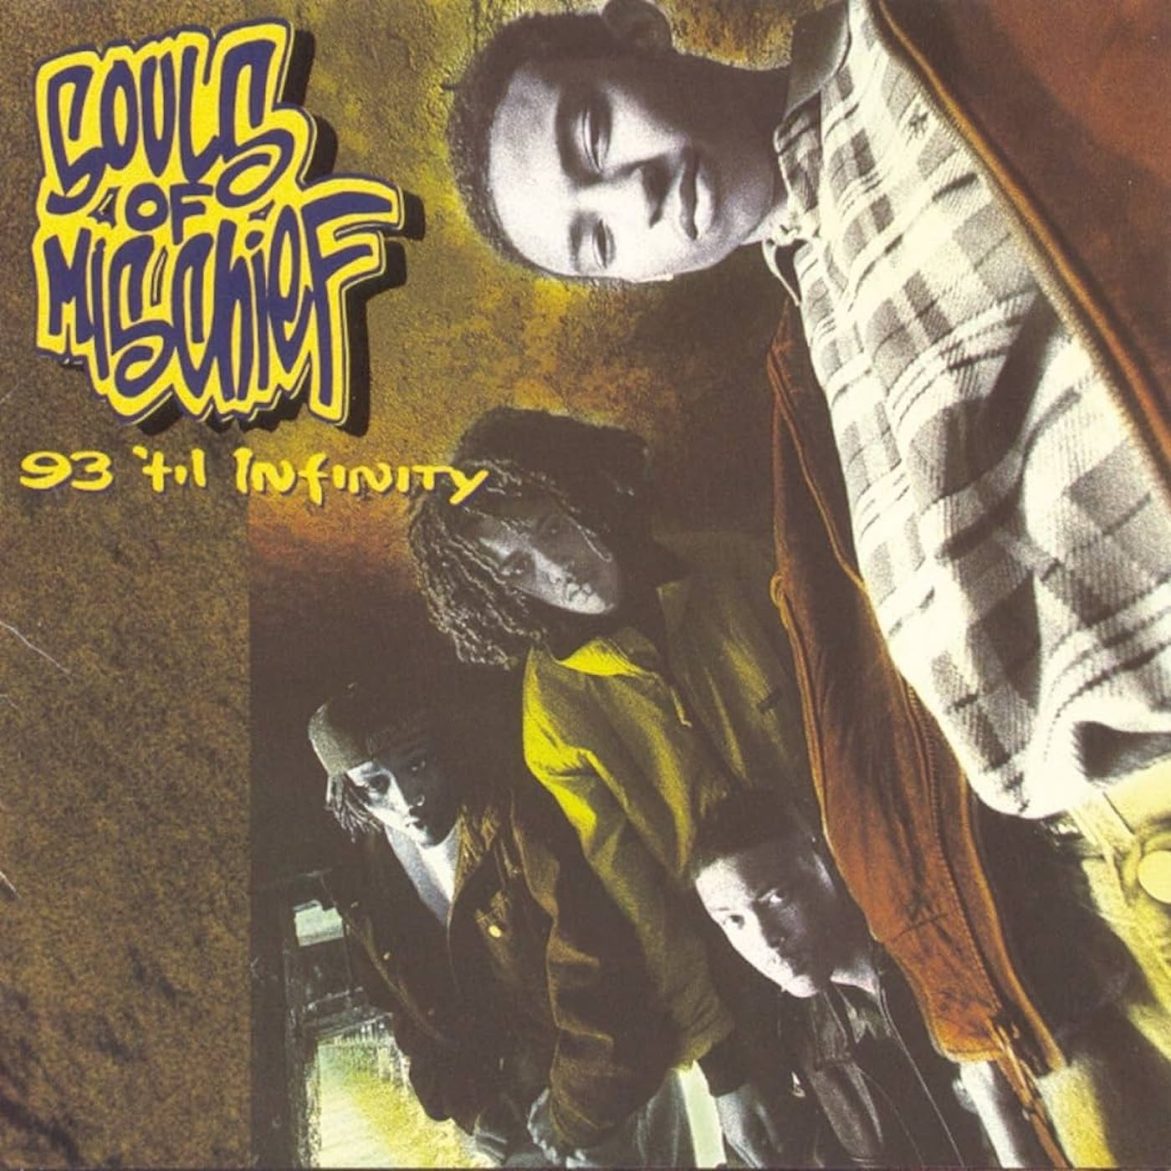 Black Podcasting - Souls Of Mischief: '93 Til Infinity (1993). "This is how we chill..."